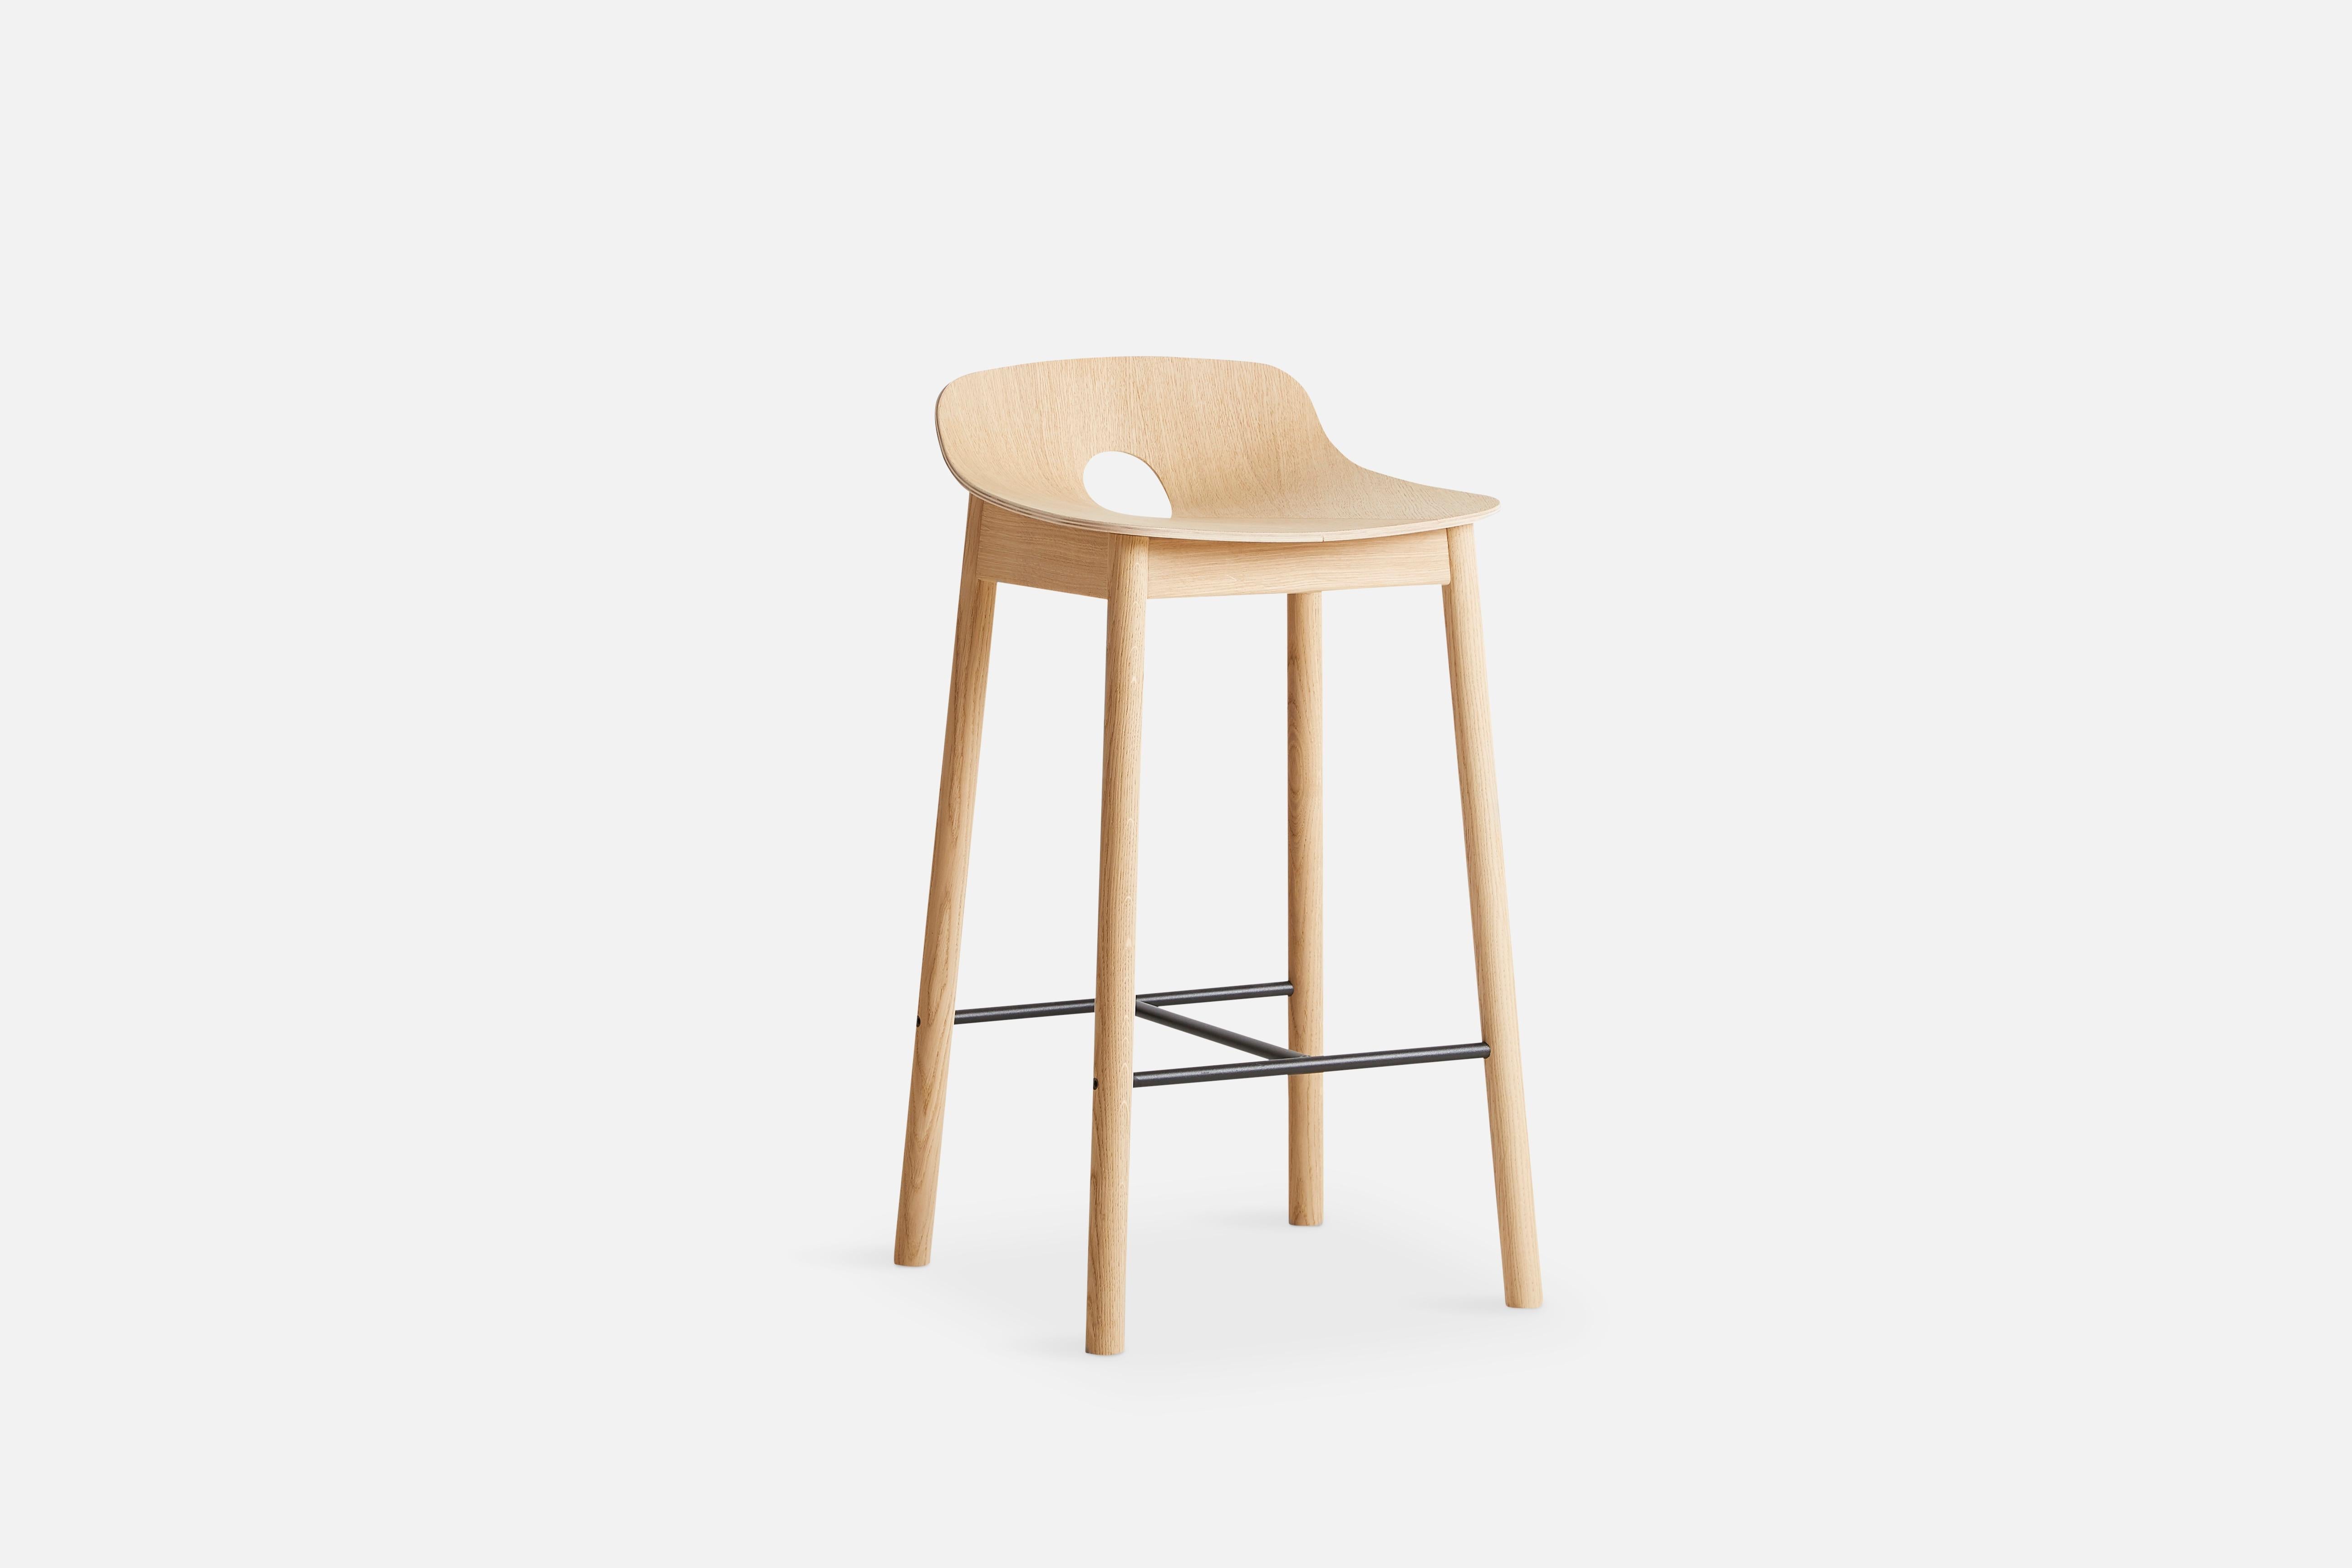 White oak Mono counter chair by Kasper Nyman
Materials: Plywood with oak veneer
Dimensions: D 42.8 x W 42.2 x H 77.6 cm

The founders, Mia and Torben Koed, decided to put their 30 years of experience into a new project. It was time for a change